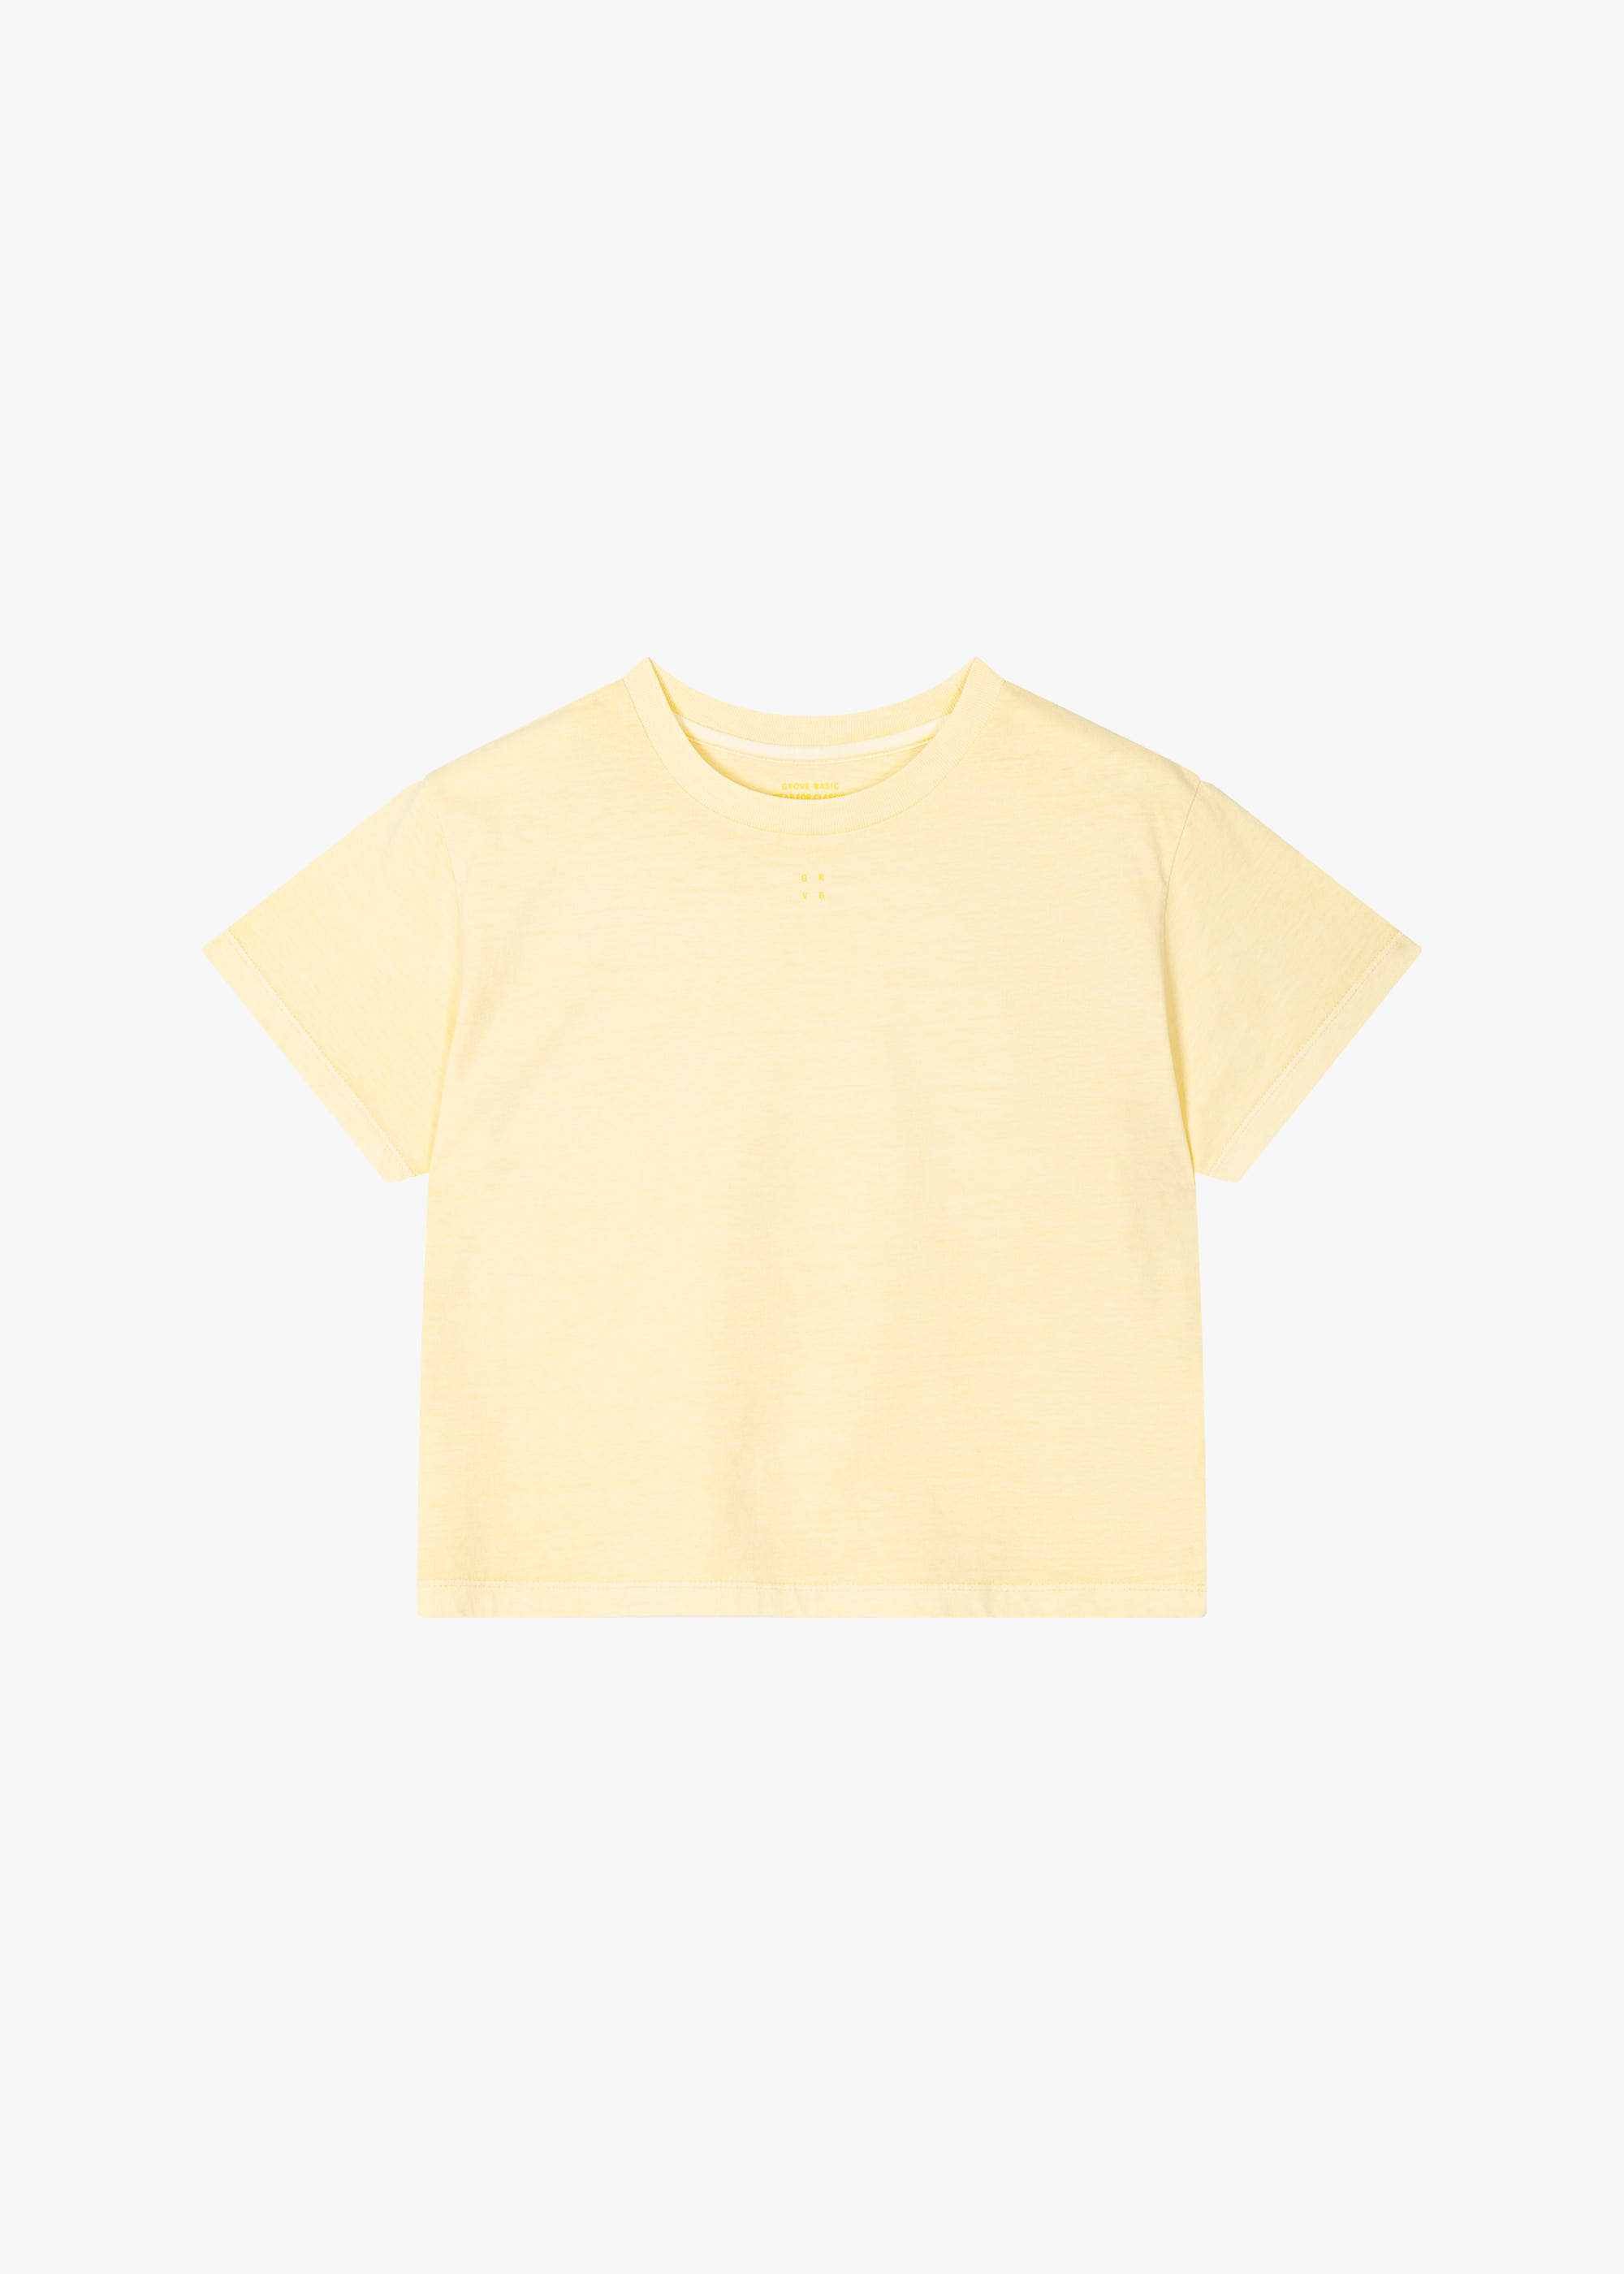 GRVB_Pig Dyed Cropped T-shirt [5COLOR]